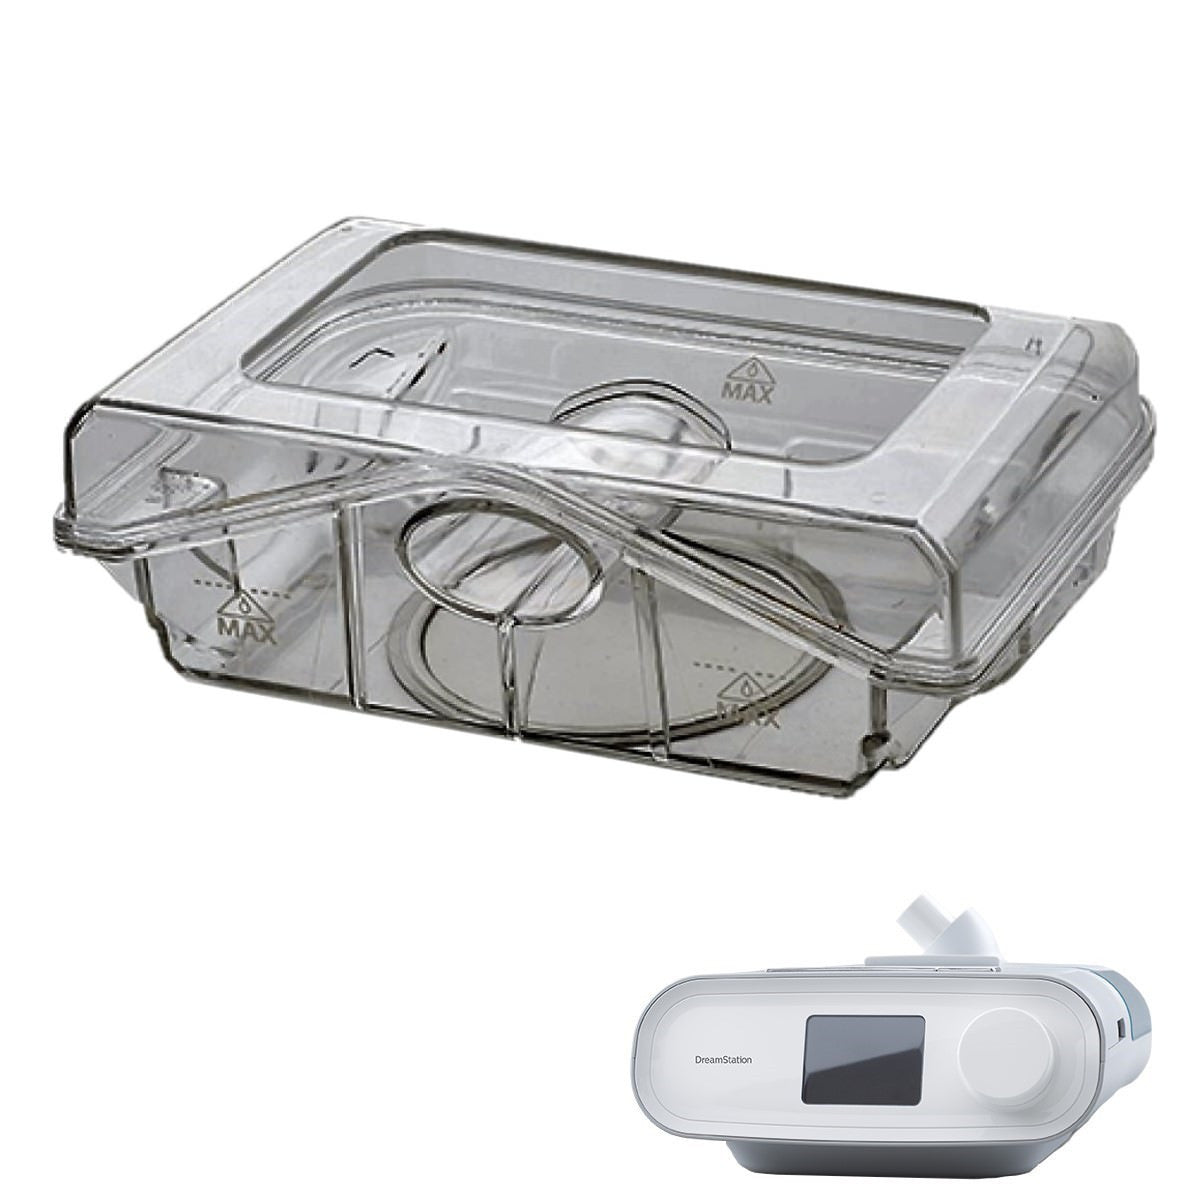 Water Chamber Tub for Phillips DreamStation CPAP & BiPAP Machines